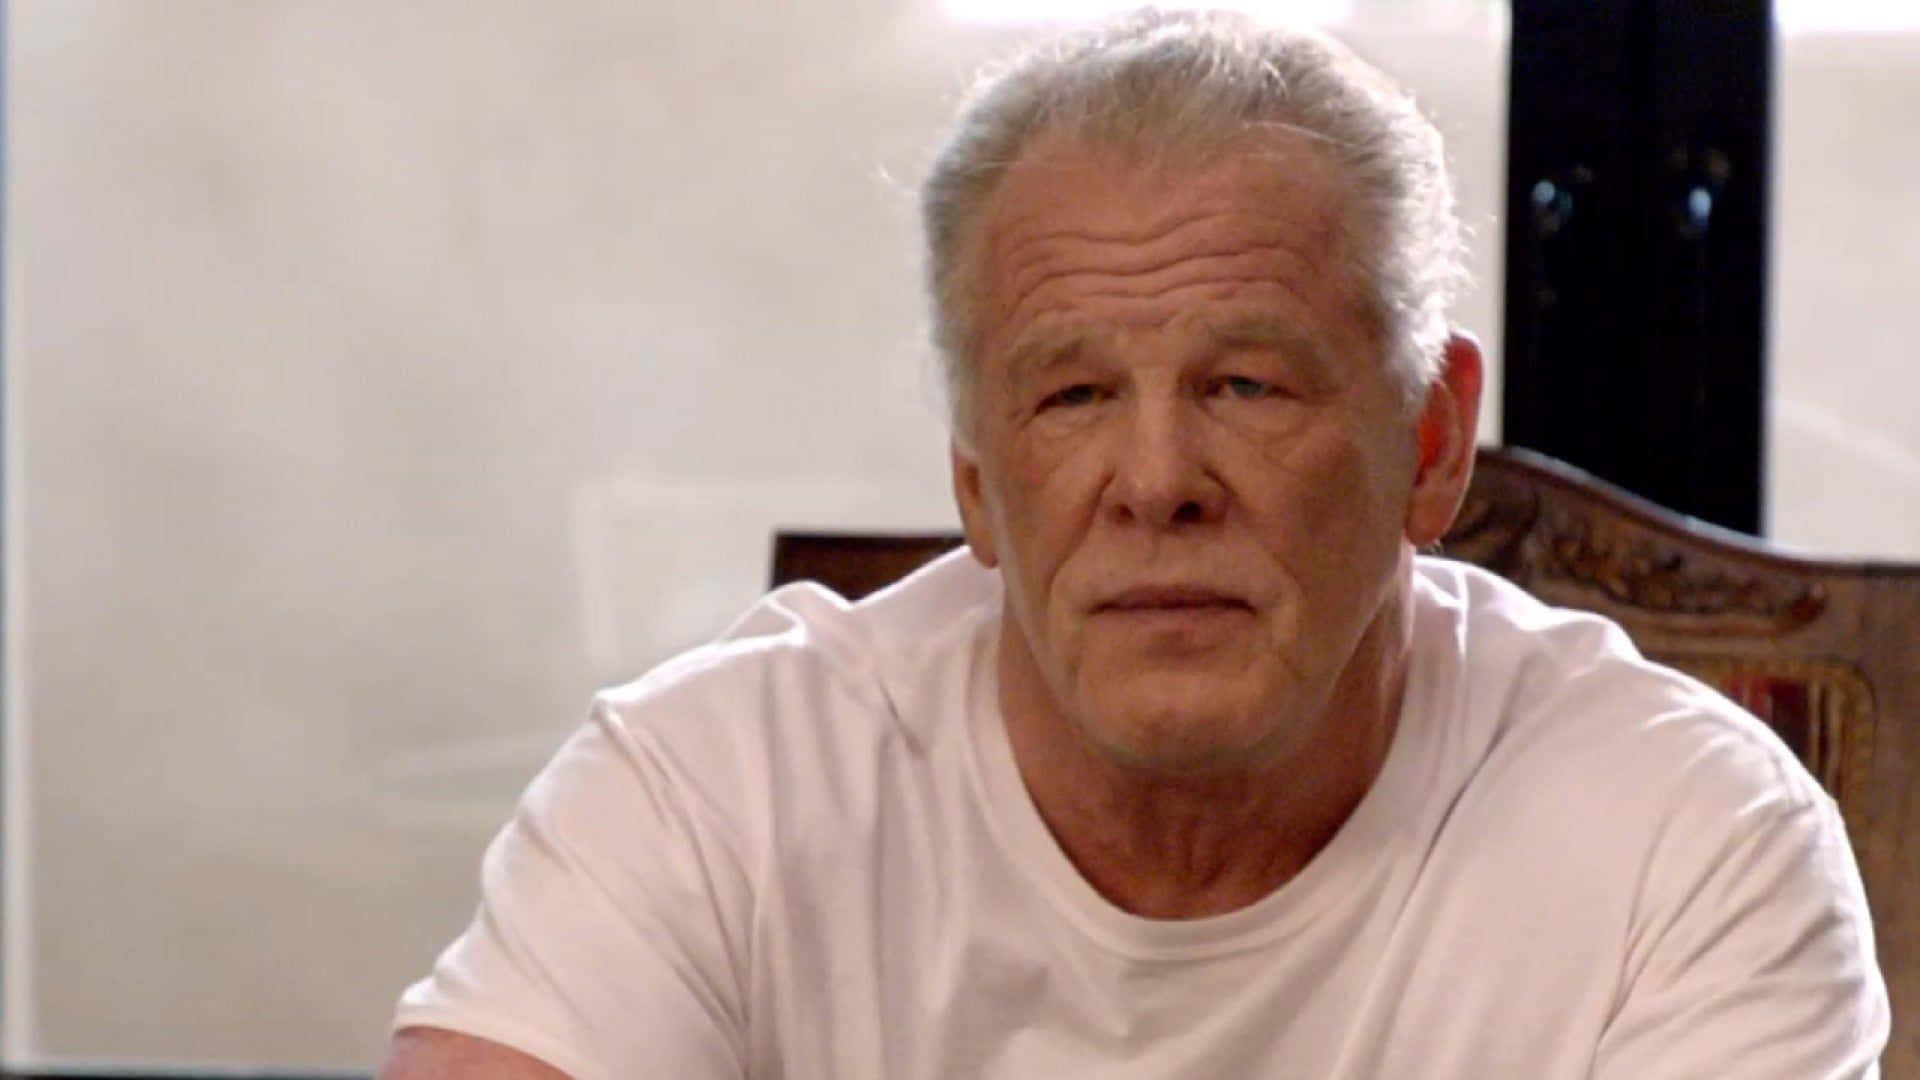 Actornick Nolte - This Sentence Does Not Fit Within The Context Of Computer Or Mobile Wallpaper. Could You Please Provide A Sentence Related To Computer Or Mobile Wallpaper? Fondo de pantalla